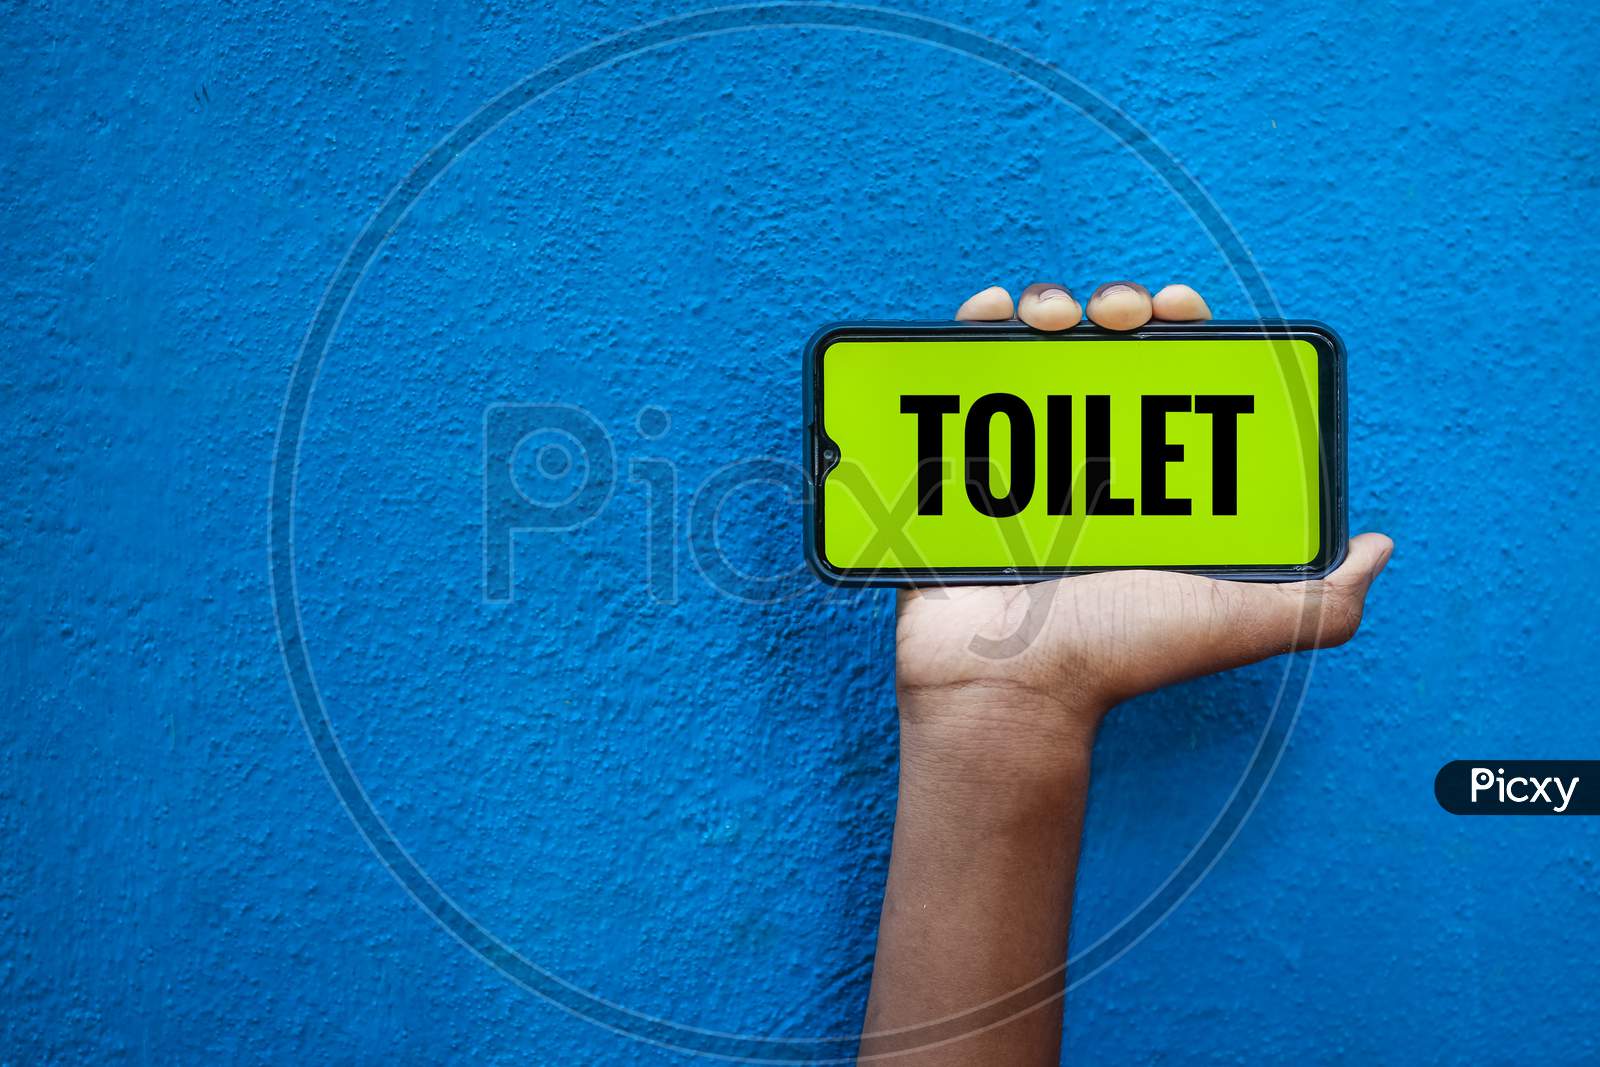 Toilet Wording On Smart Phone Screen Isolated On Blue Background With Copy Space For Text. Person Holding Mobile On His Hand And Showing Front Of The Screen Word Toilet.